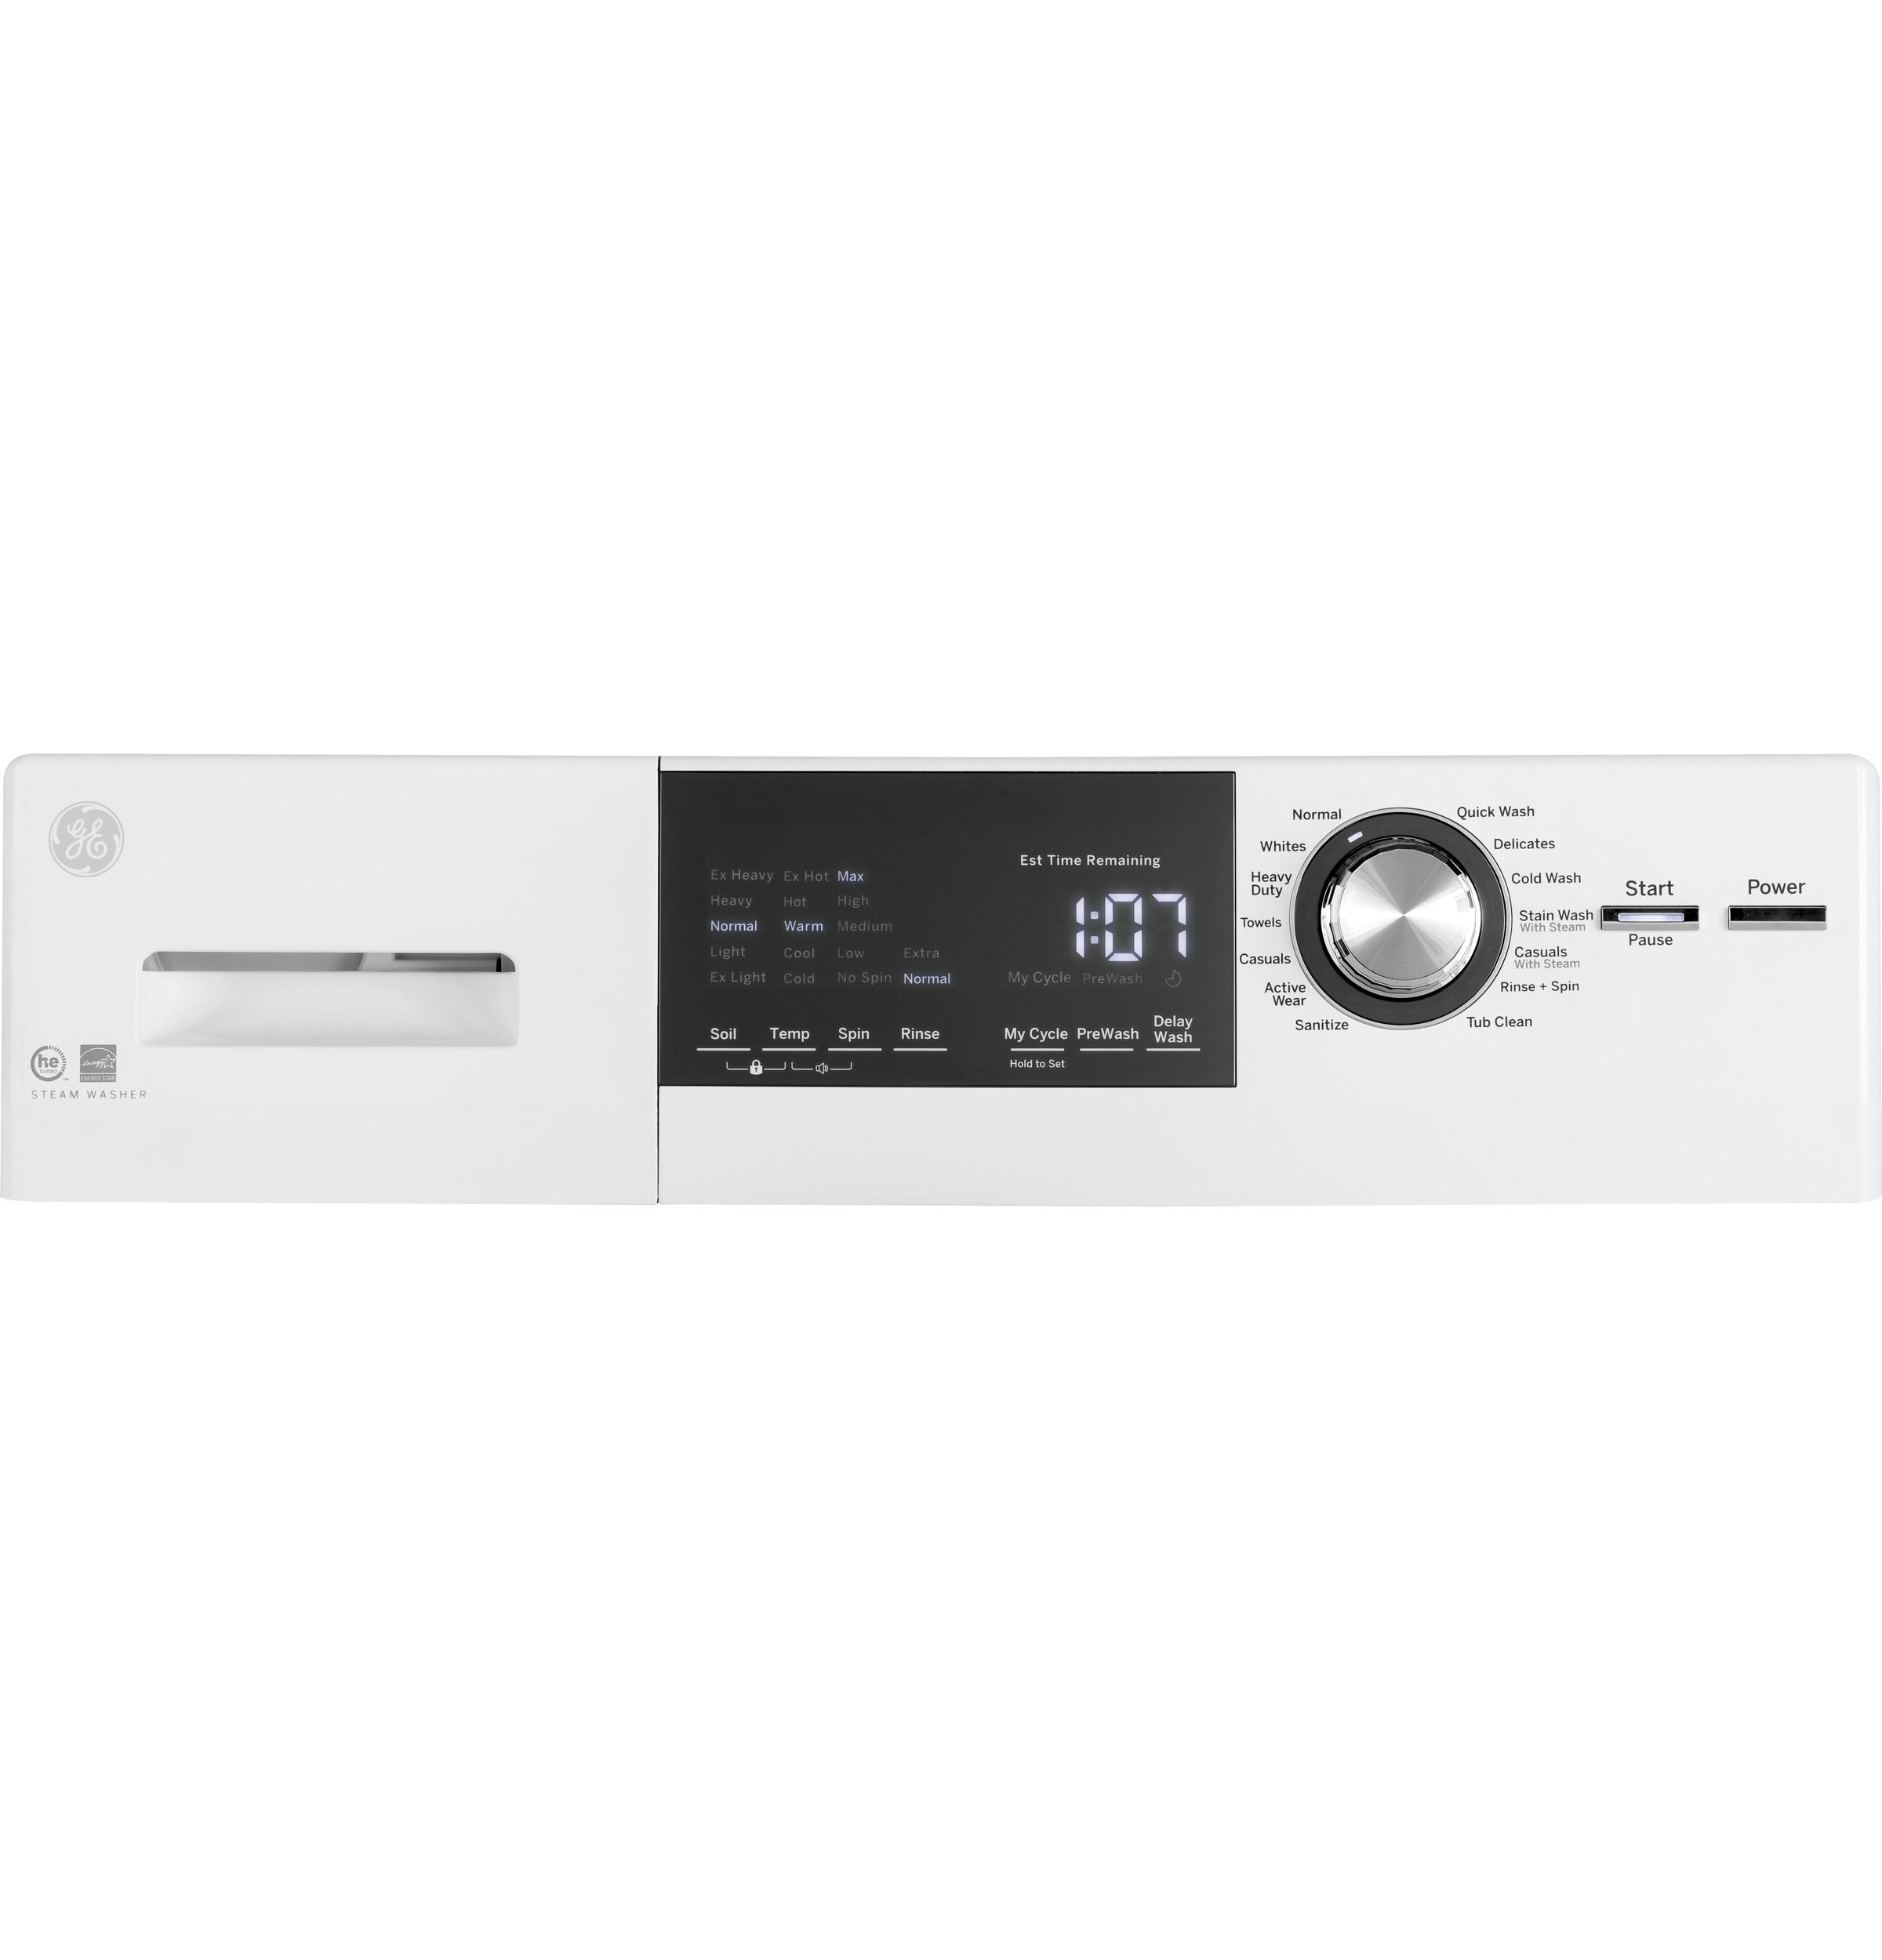 GENERAL ELECTRIC GFW148SSMWW 24 Frontload Washer with Steam 2.4 cu. ft. Capacity Plugs into Dryer or Wall Energy Star Electronic Touch Controls in White - image 2 of 5